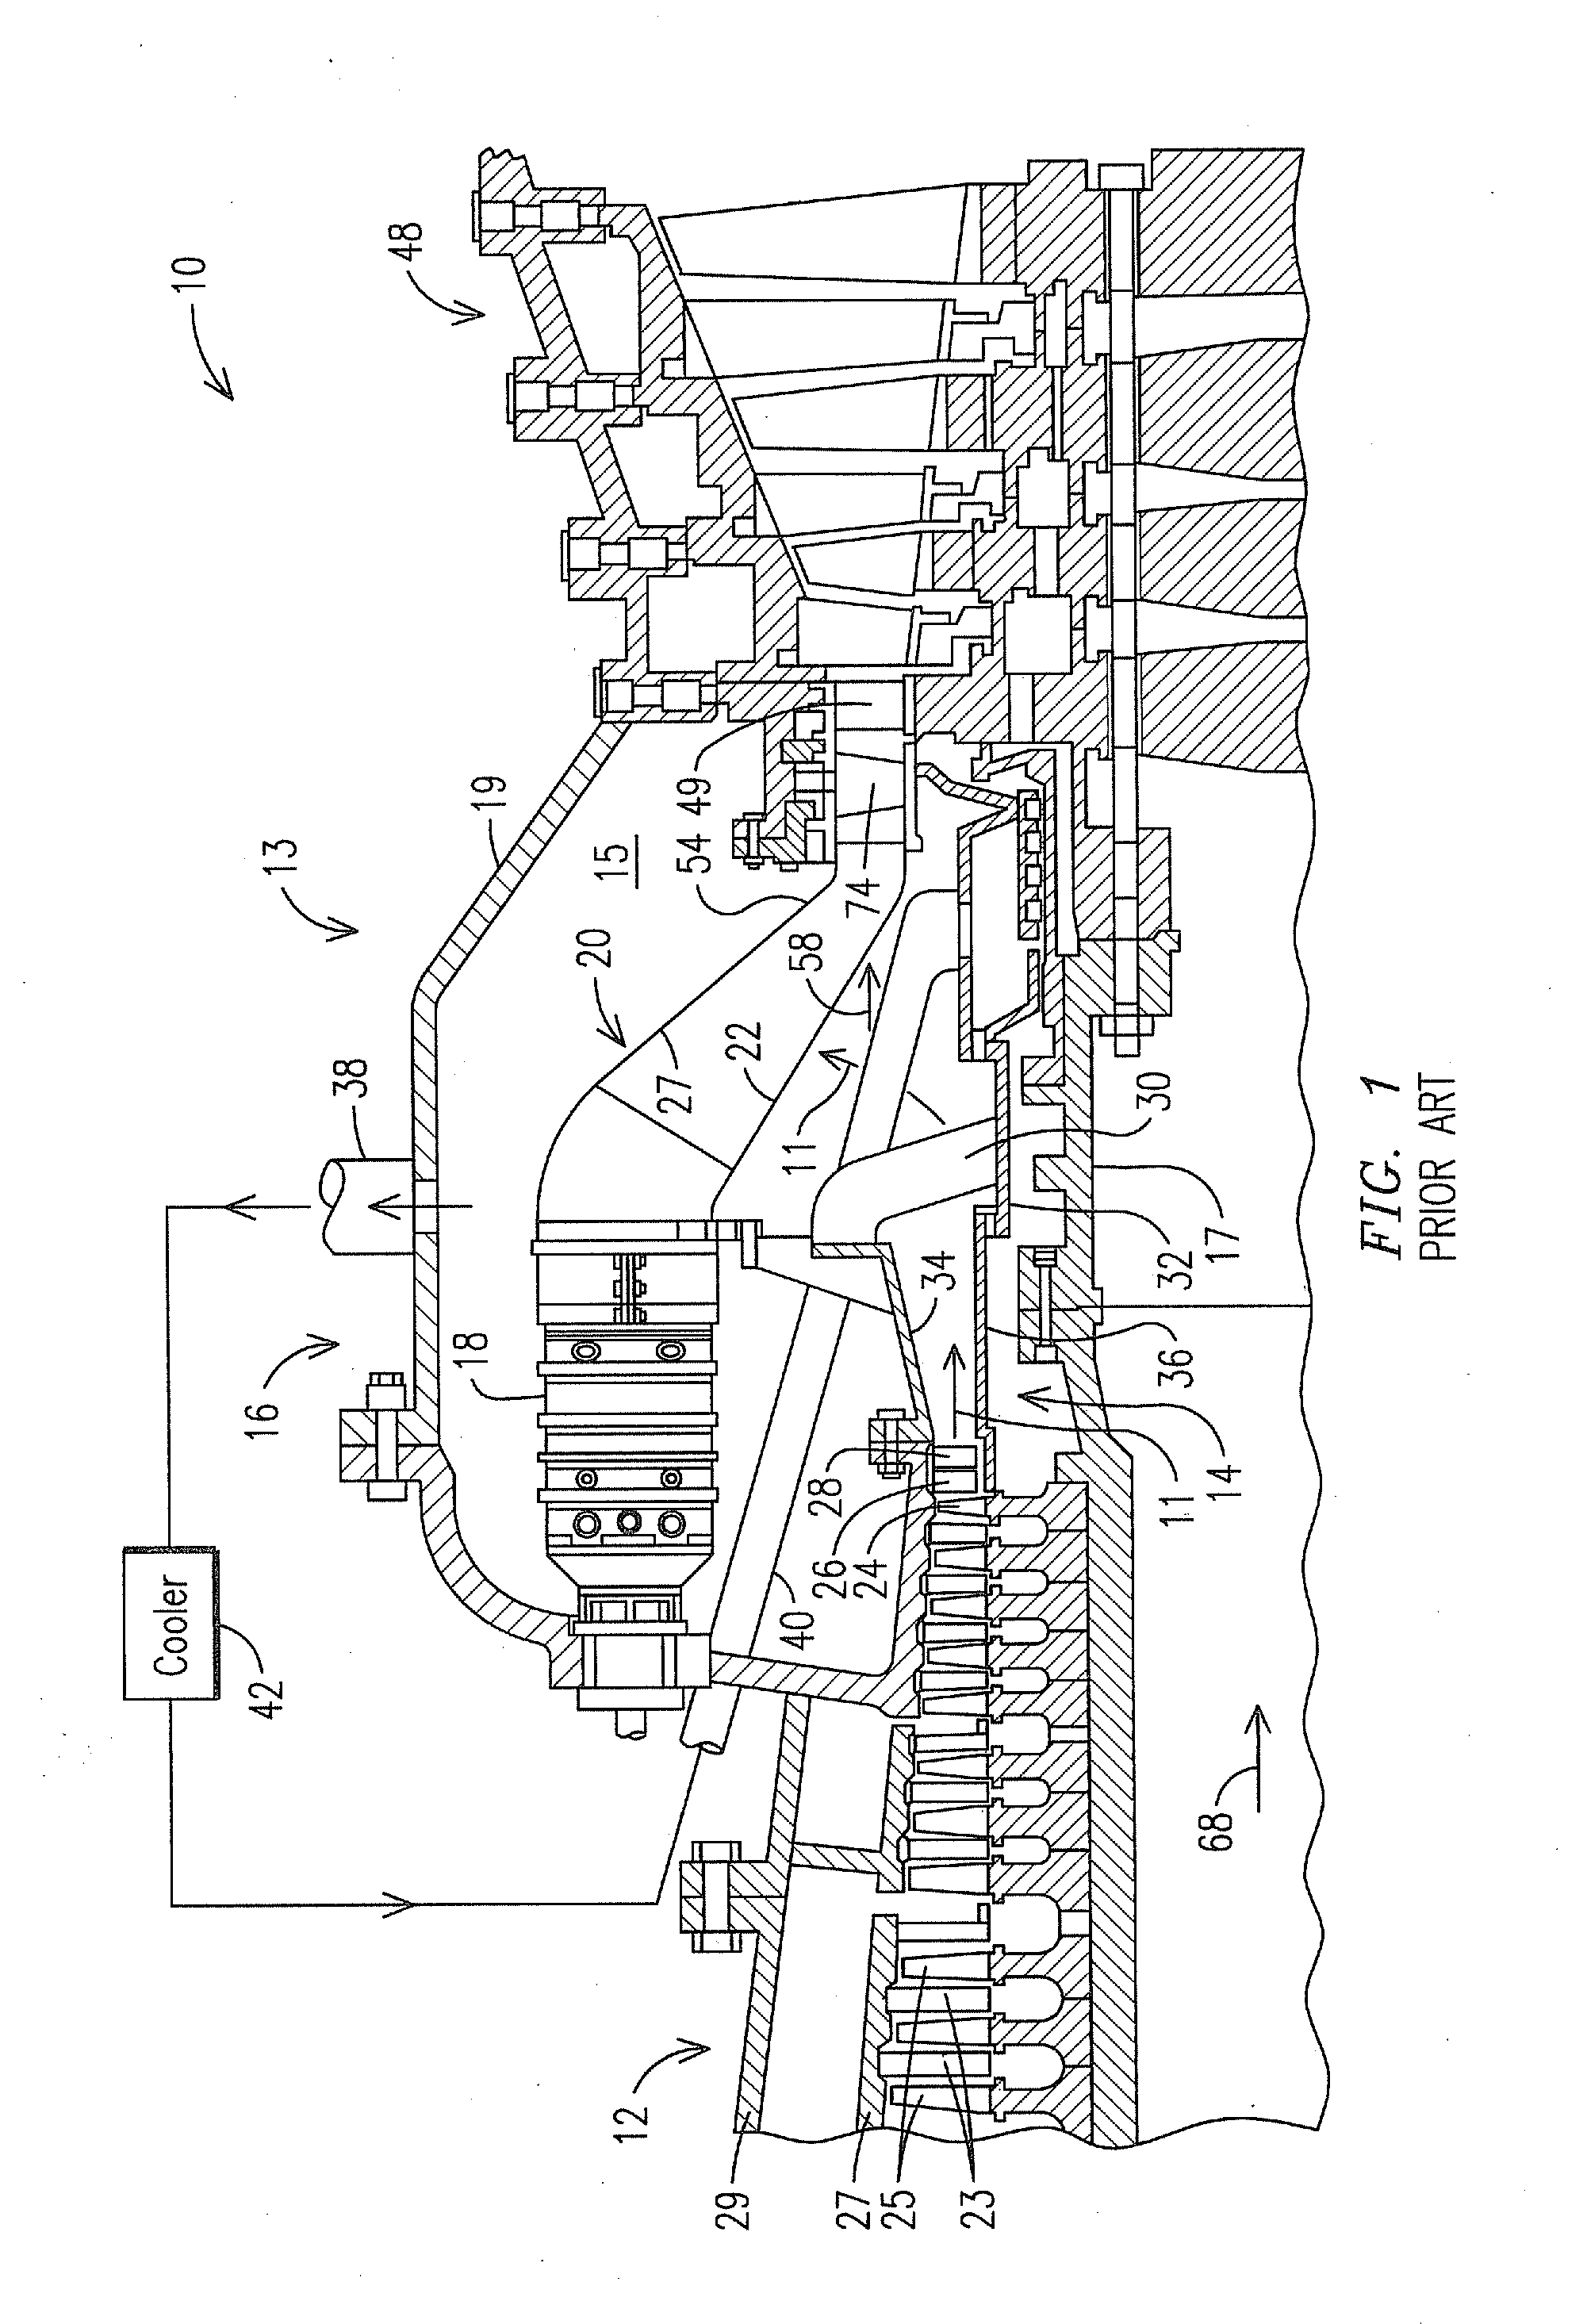 Mid-section of a can-annular gas turbine engine with an improved rotation of air flow from the compressor to the turbine